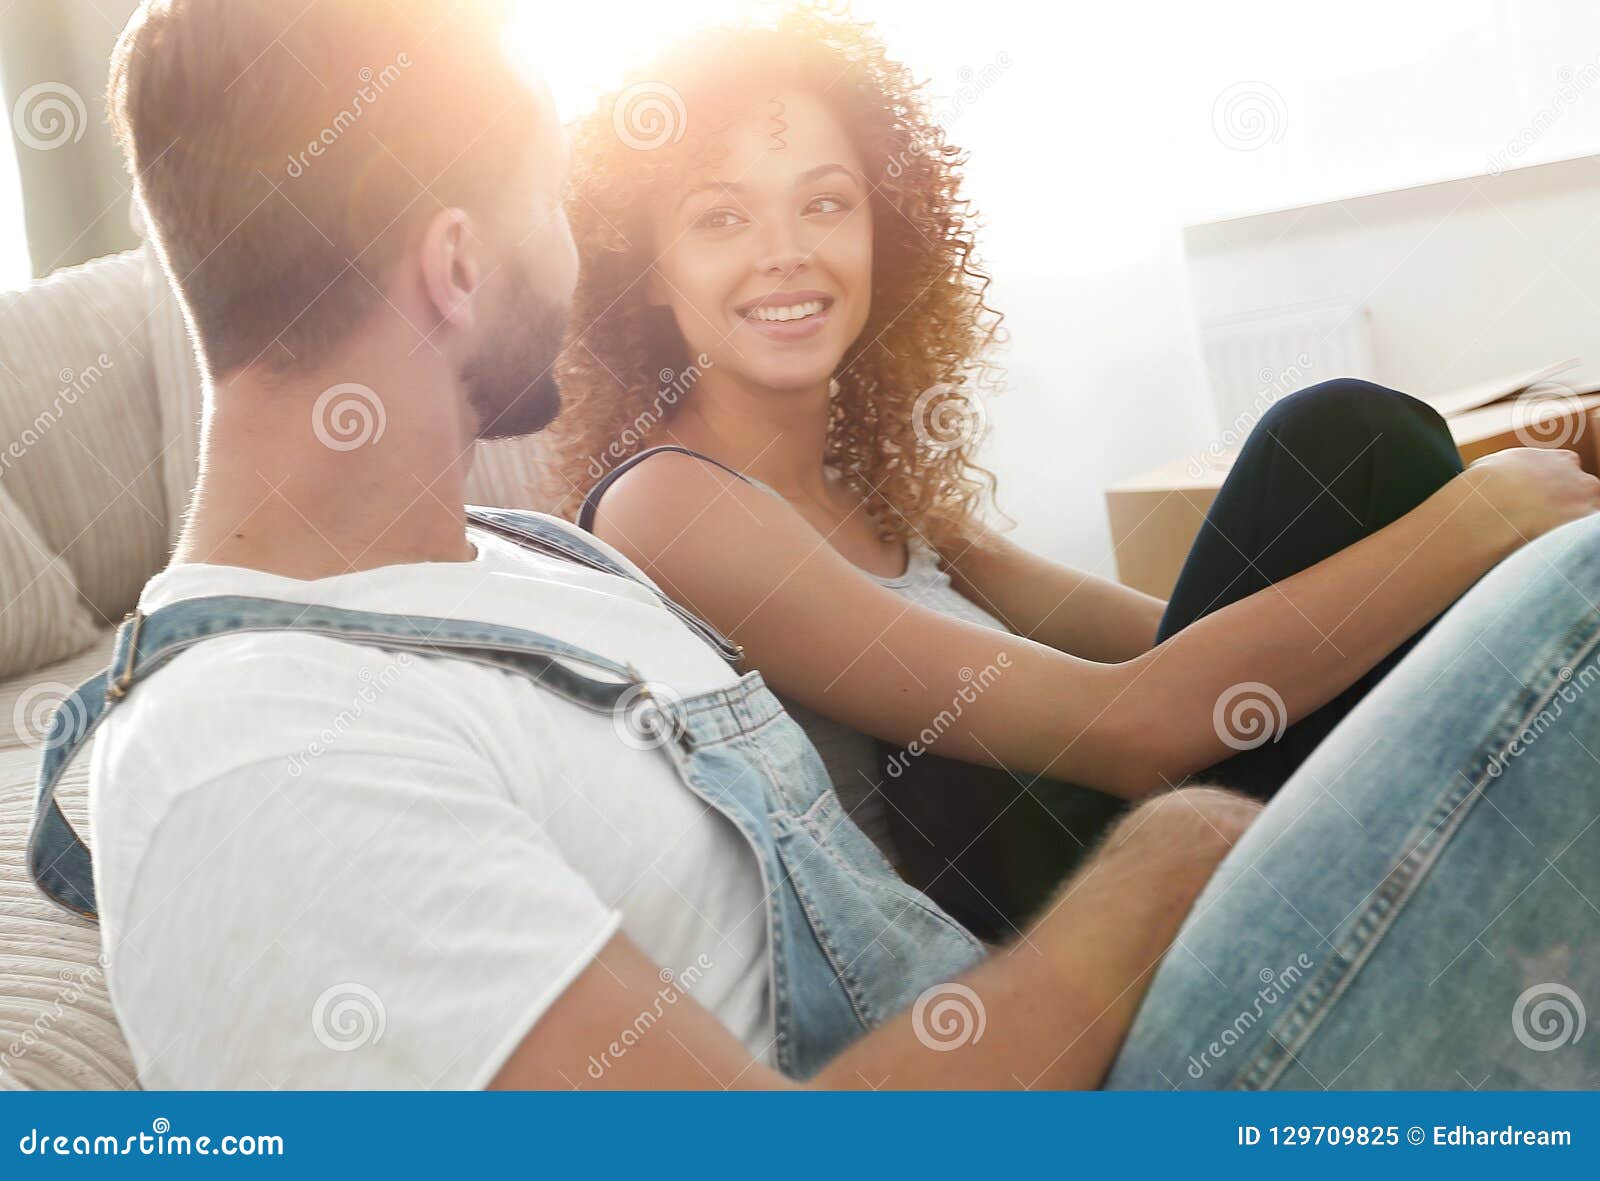 Closeup Of A Happy Married Couple Sitting In A New Apartment Stock